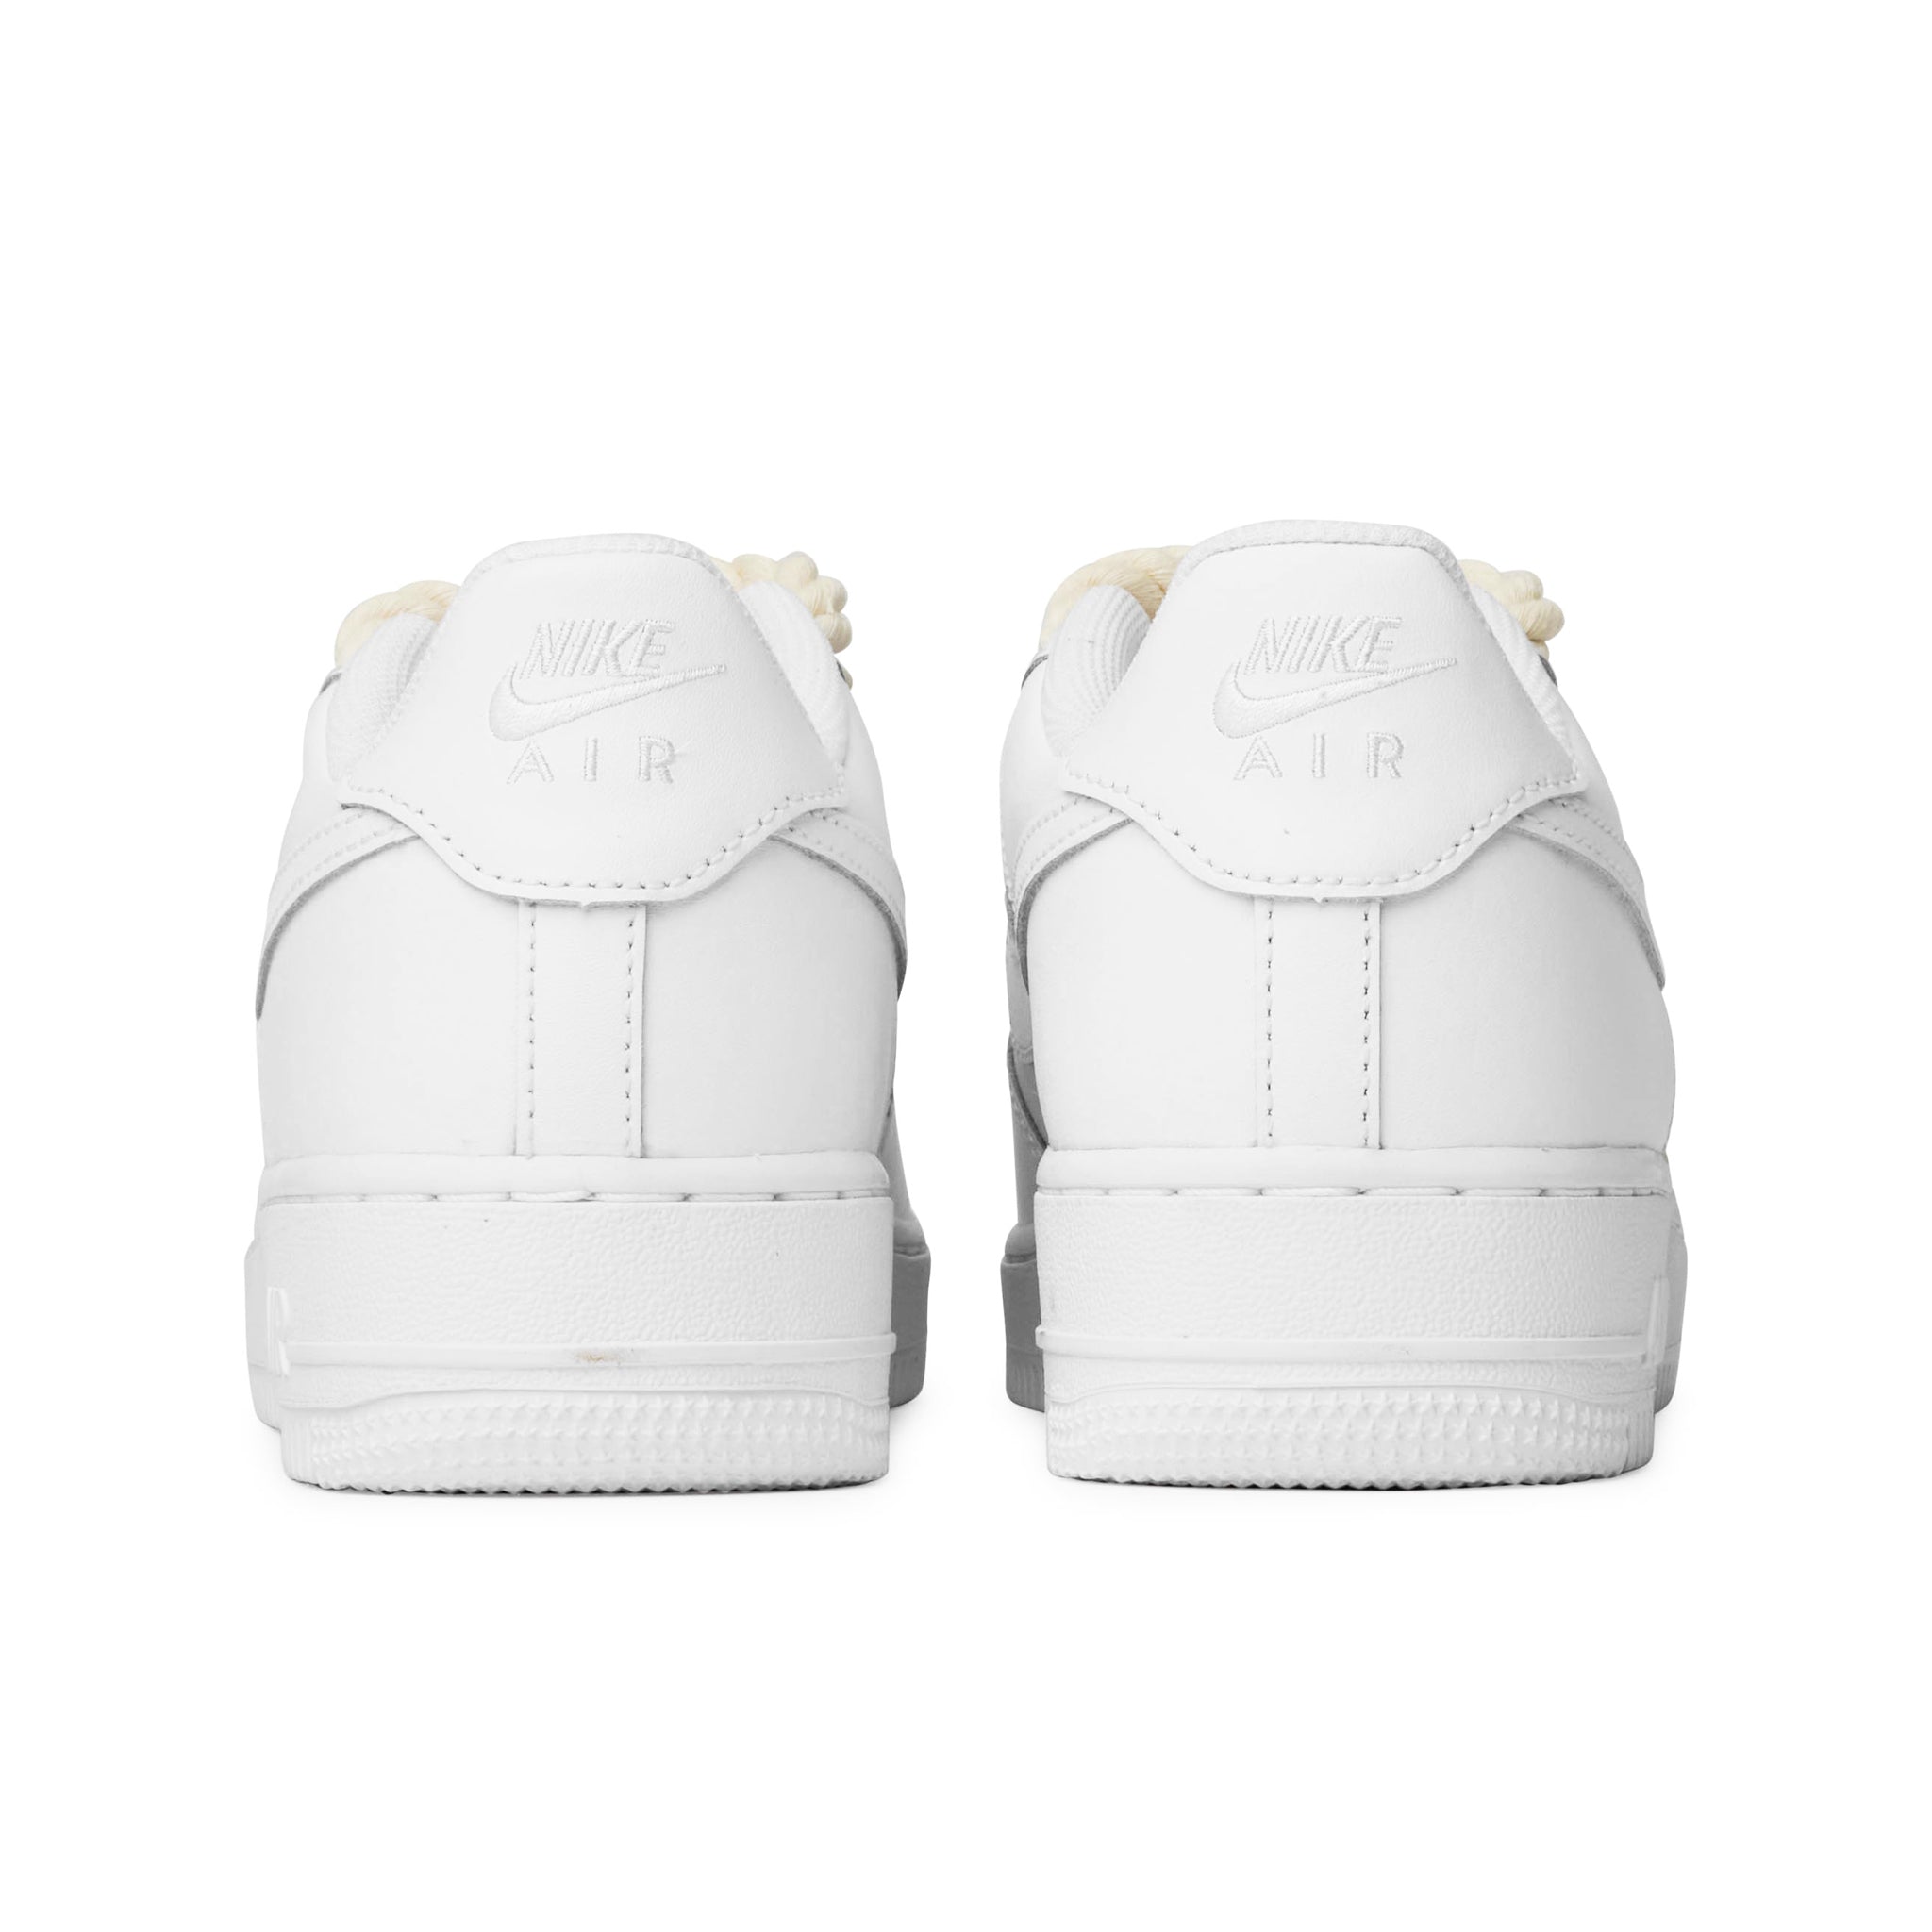 Back view of Nike Air Force 1 Low Rope Lace White Cream (GS) 314192-117